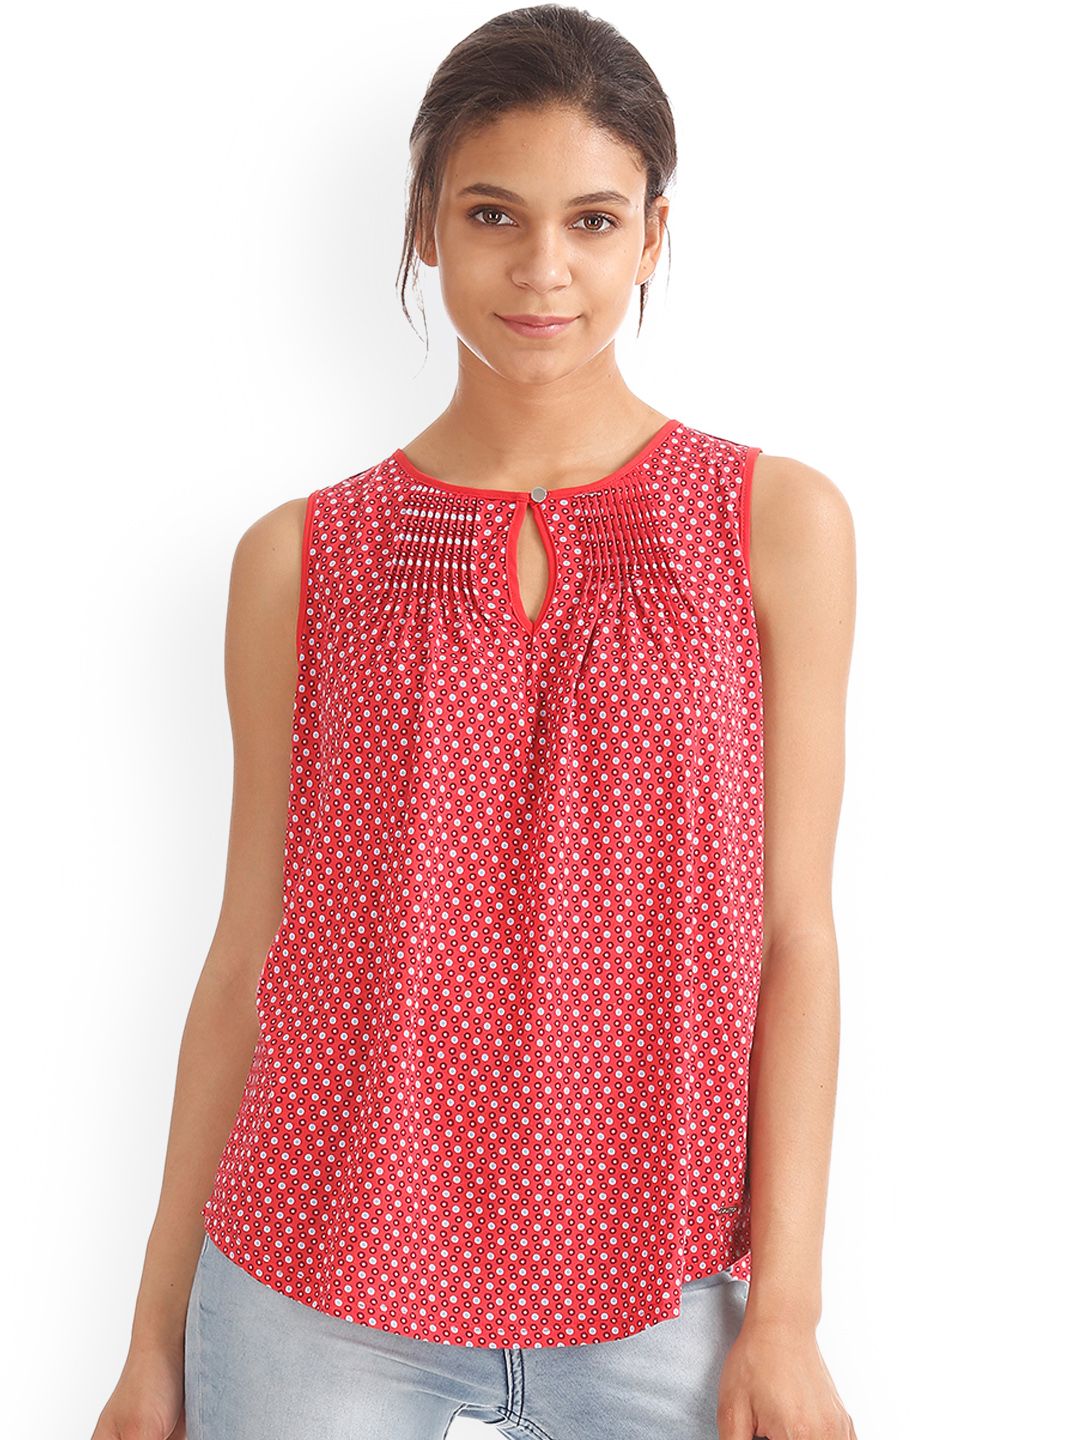 Nautica Women Red Printed A-Line Top Price in India